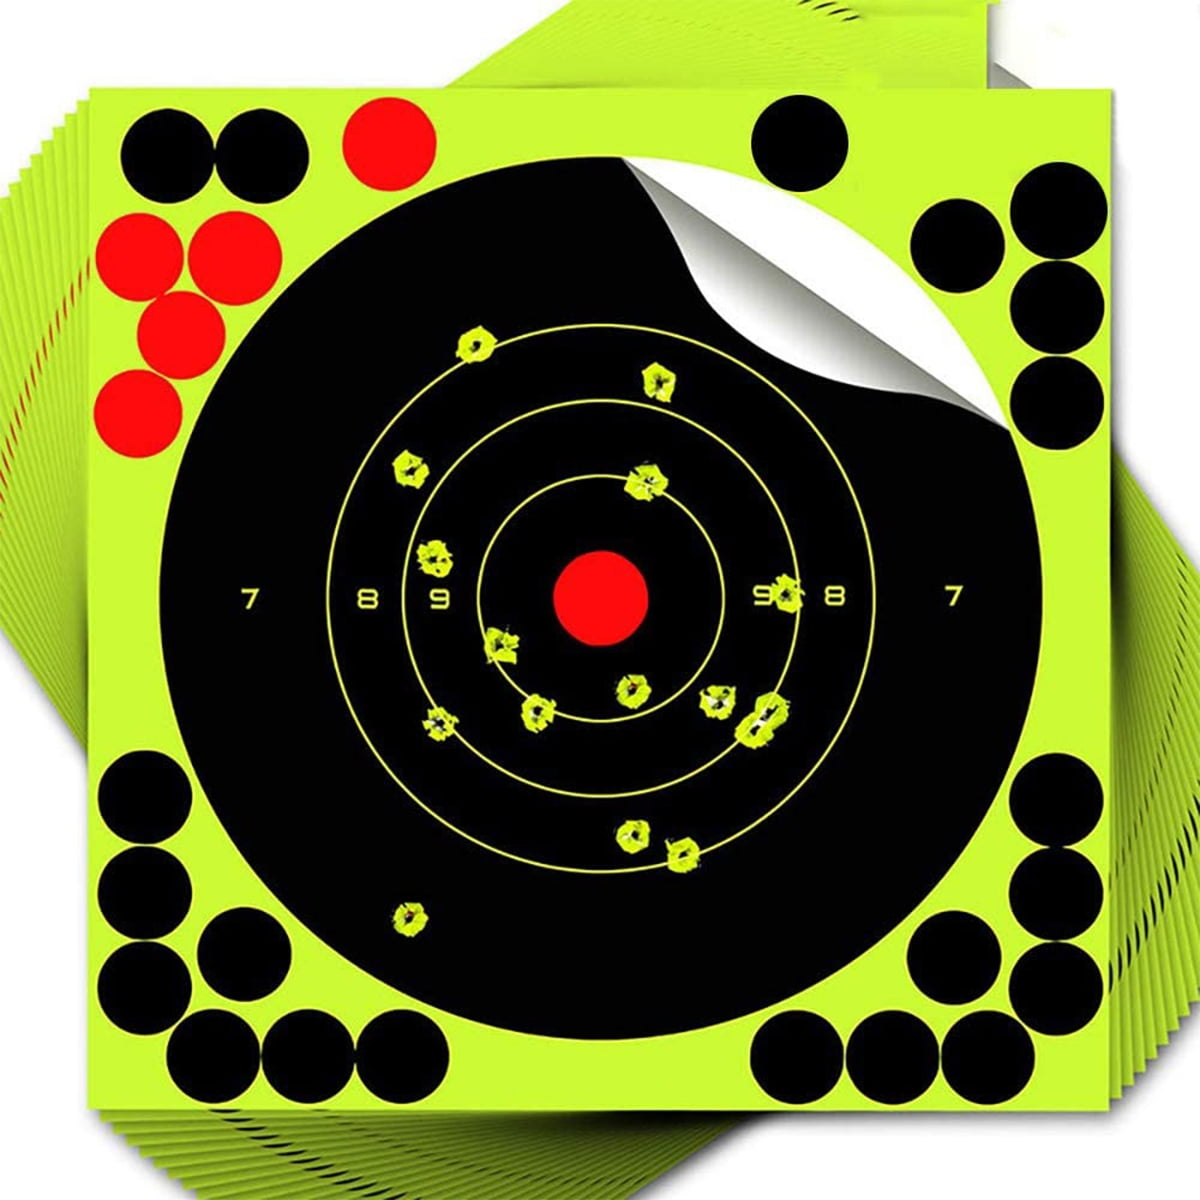 kitwin 50Pcs Targets 8 Inch Round Targets Stickers Target Training ...